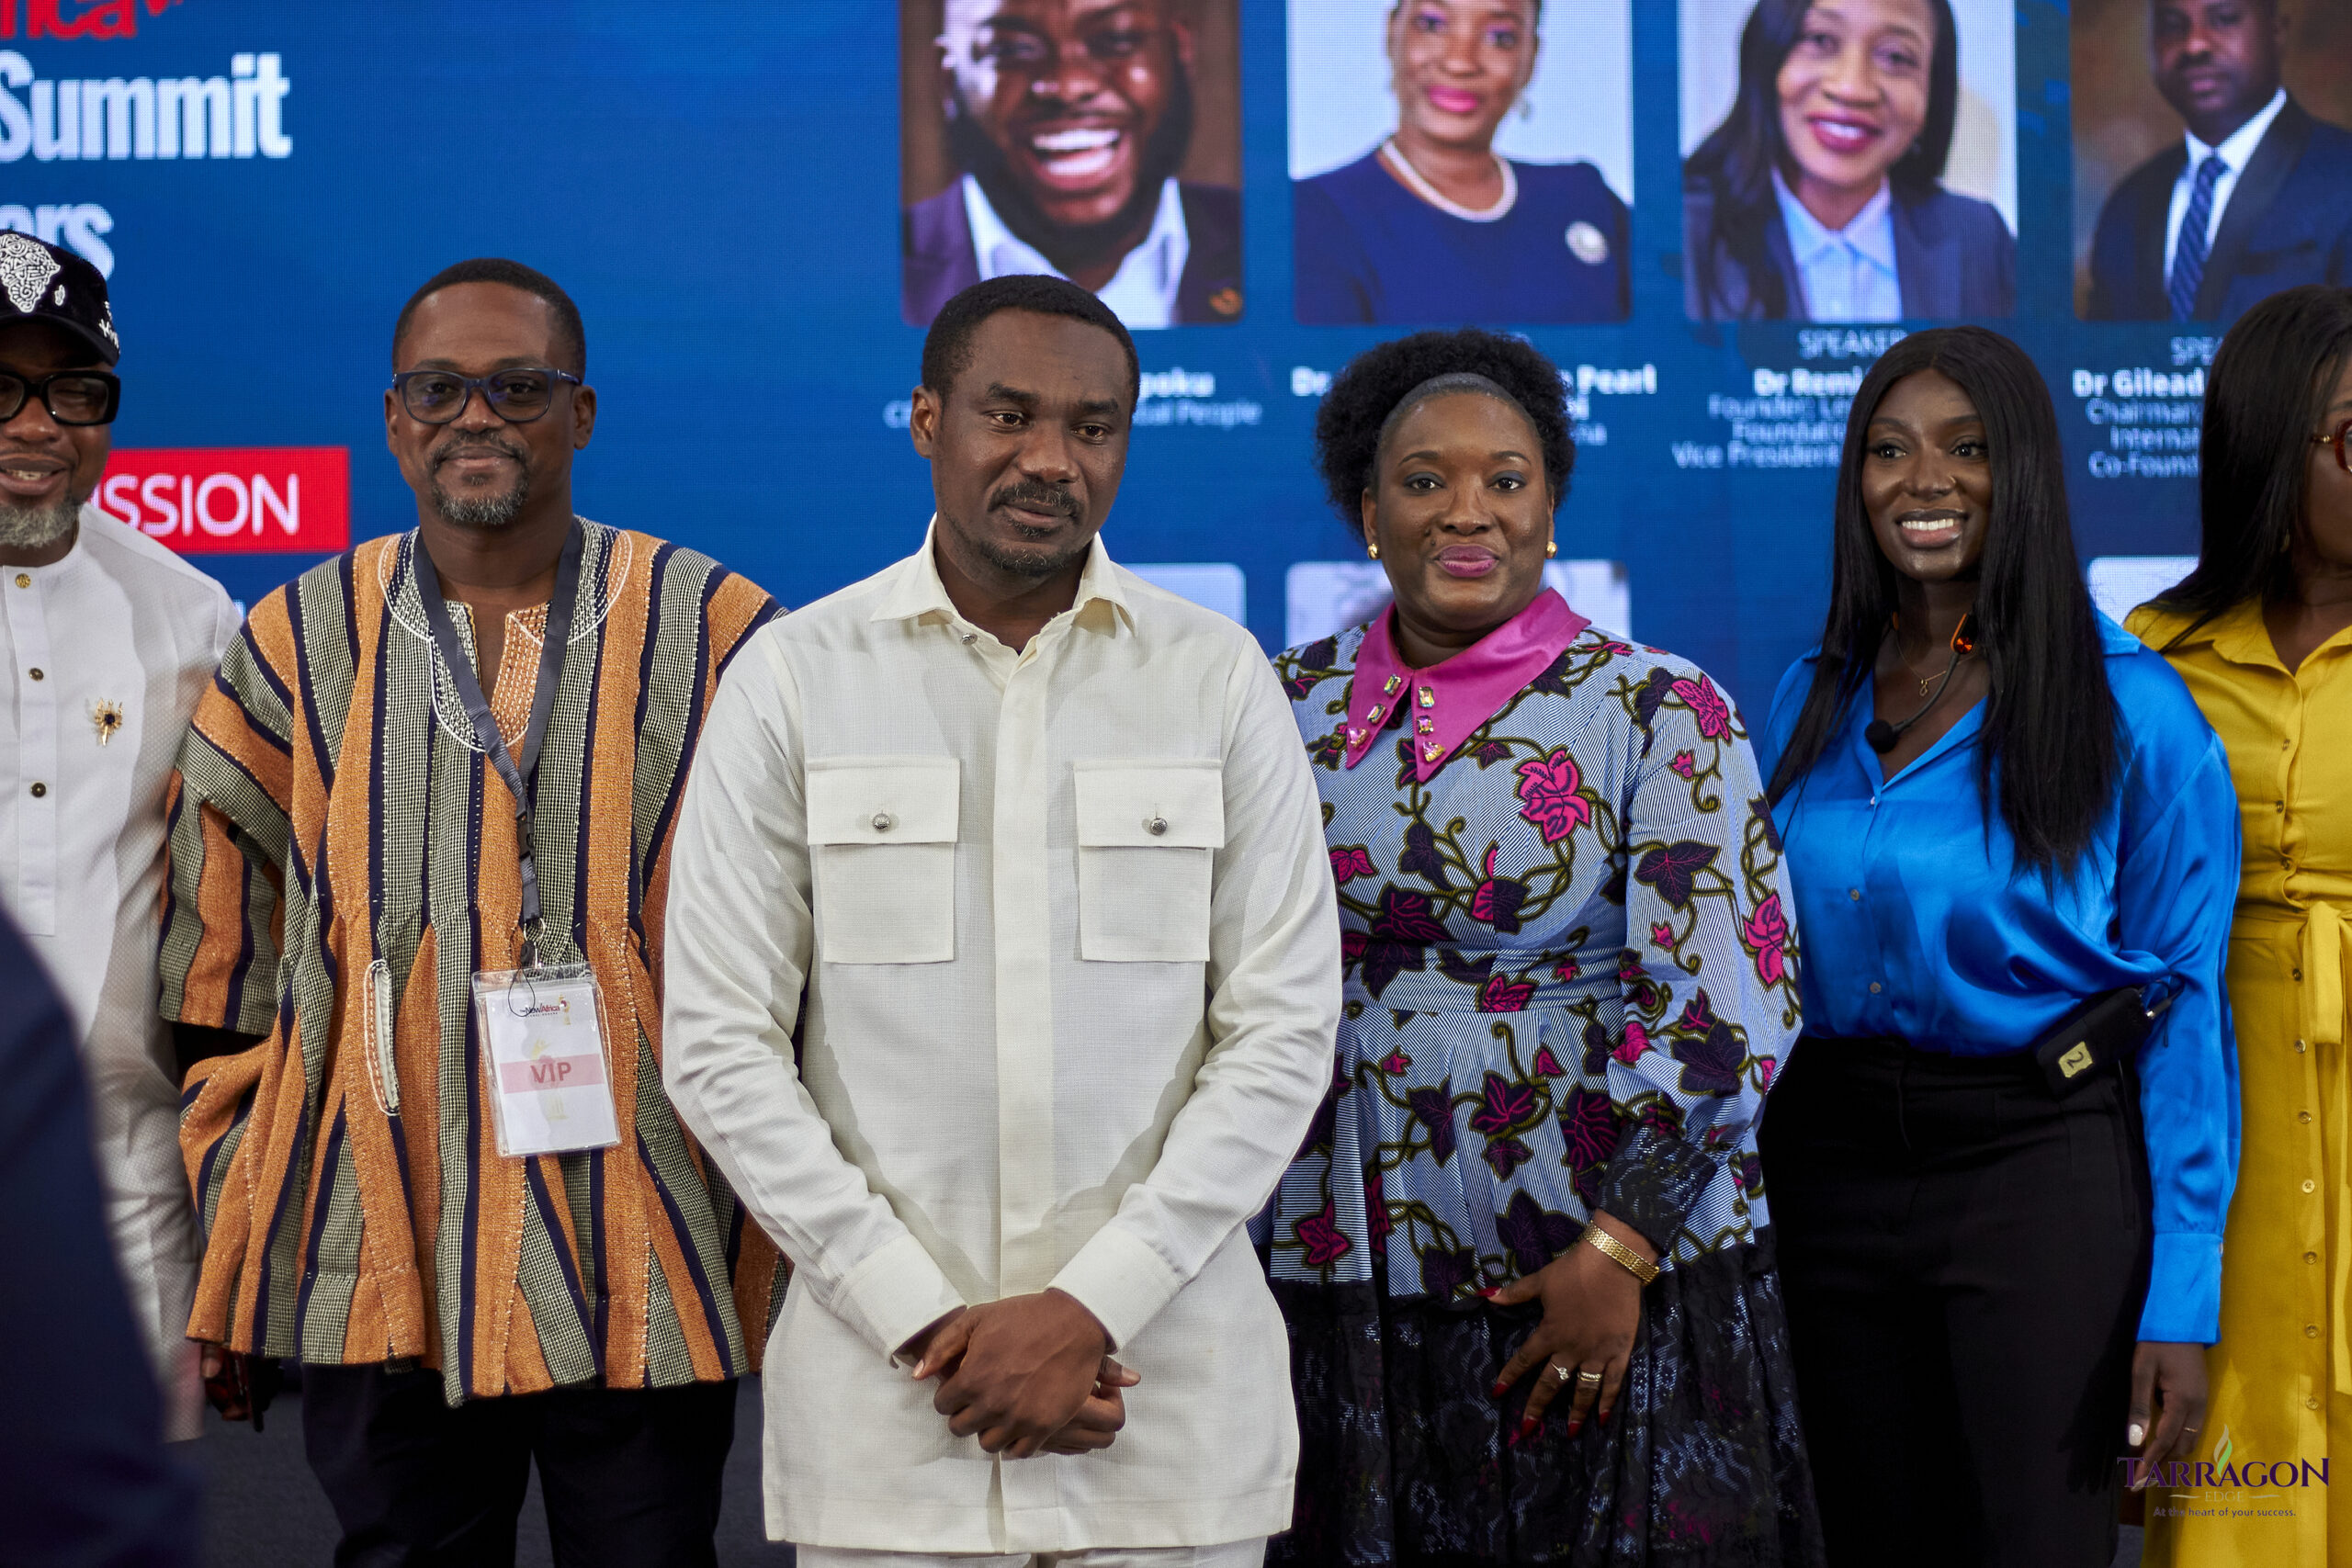 Dr. Genevieve Duncan And Other Renowned Ghanaians Honored At The New Africa Leaders Summit ’23